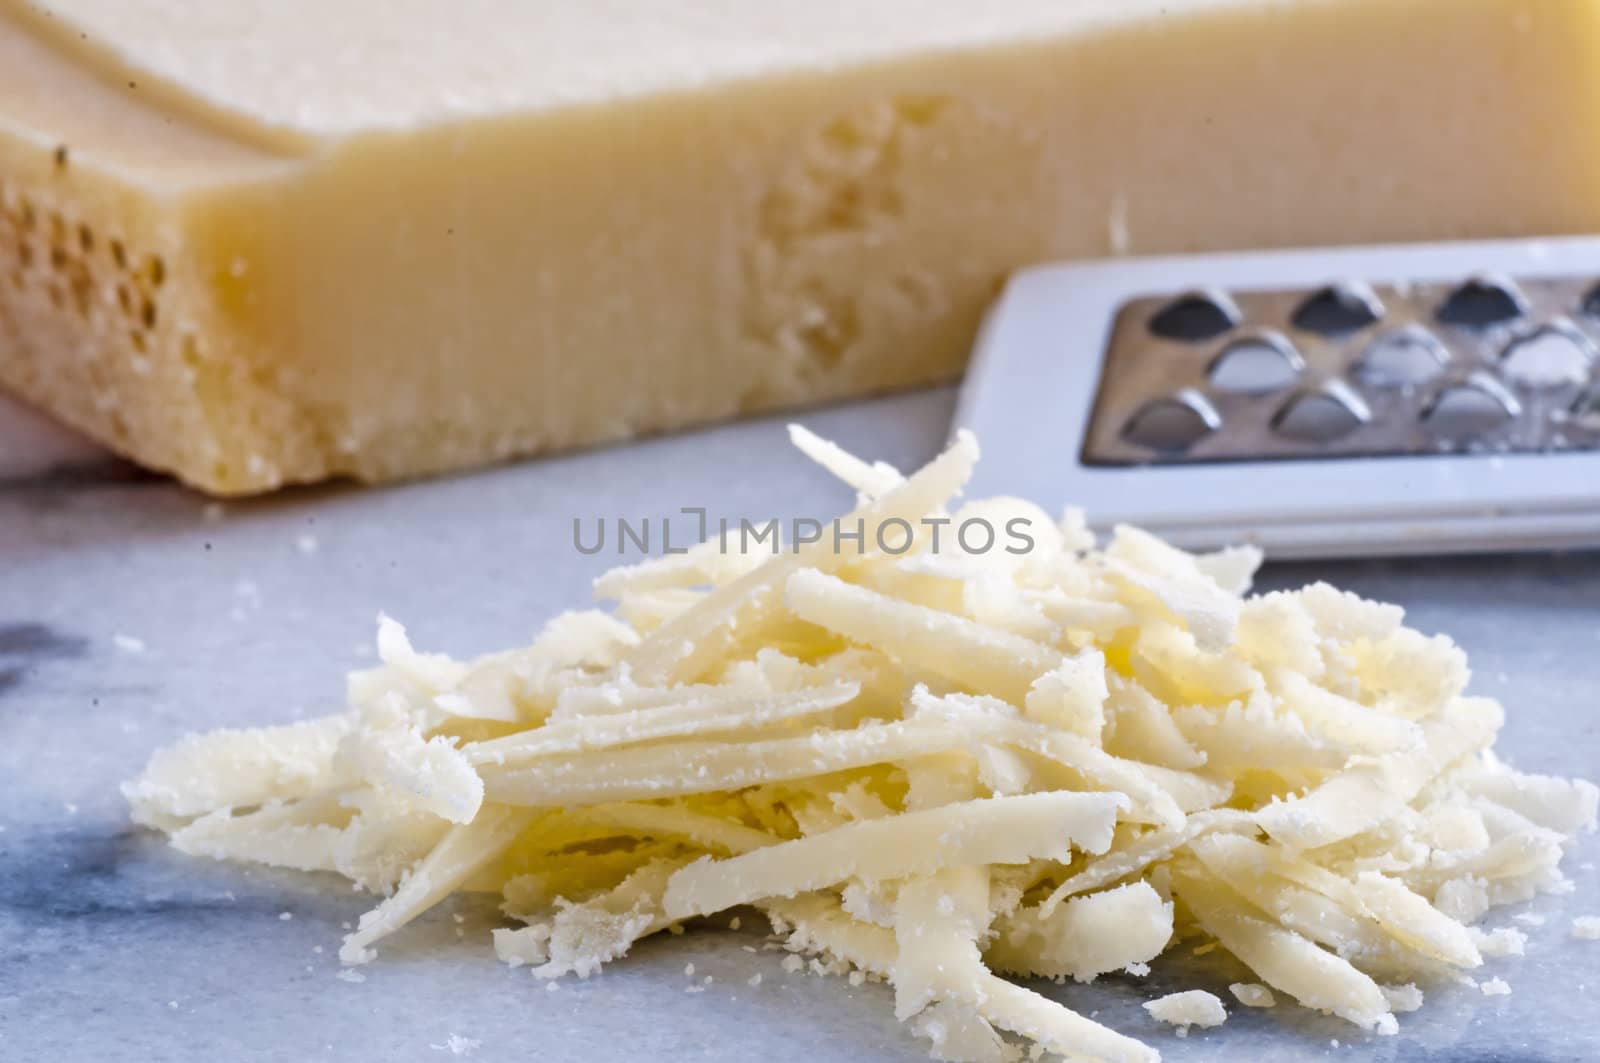 parmesan cheese grated